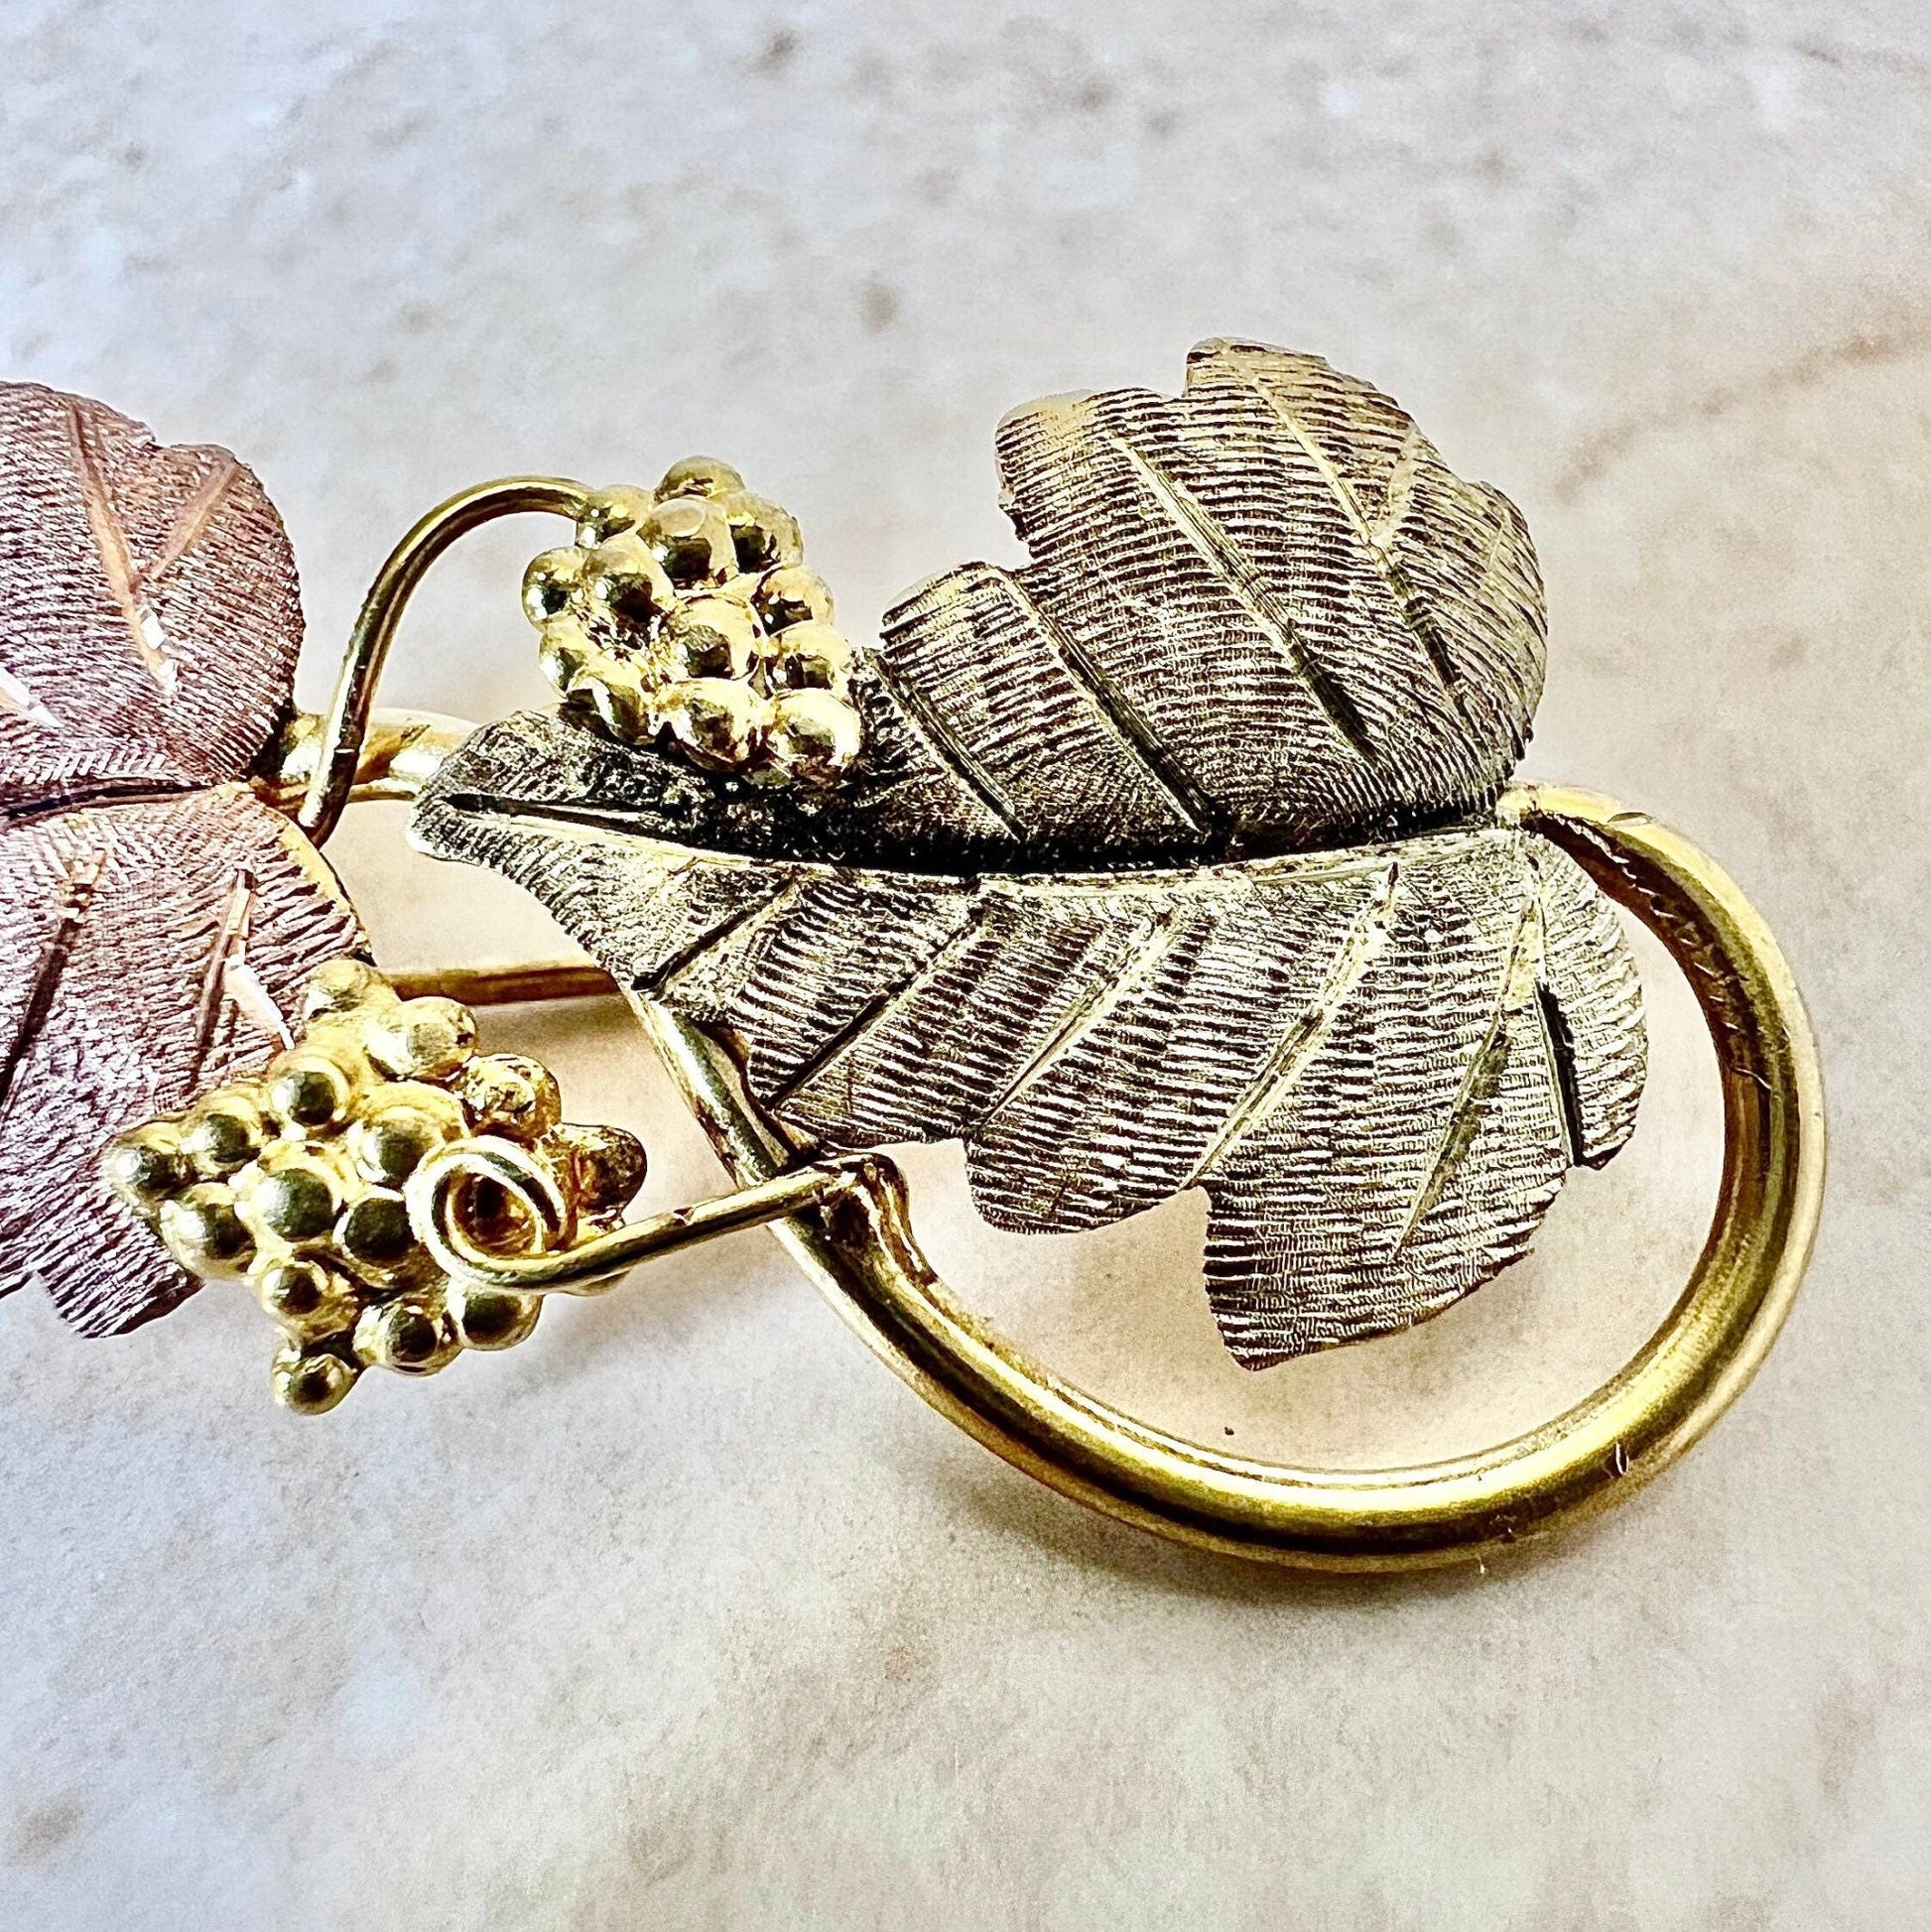 Vintage 12K Black Hills Gold Brooch Pin - Gold Grape Leaf Brooch - Birthday Gift For Her - Jewelry Sale - Best Valentine’s Day Gift